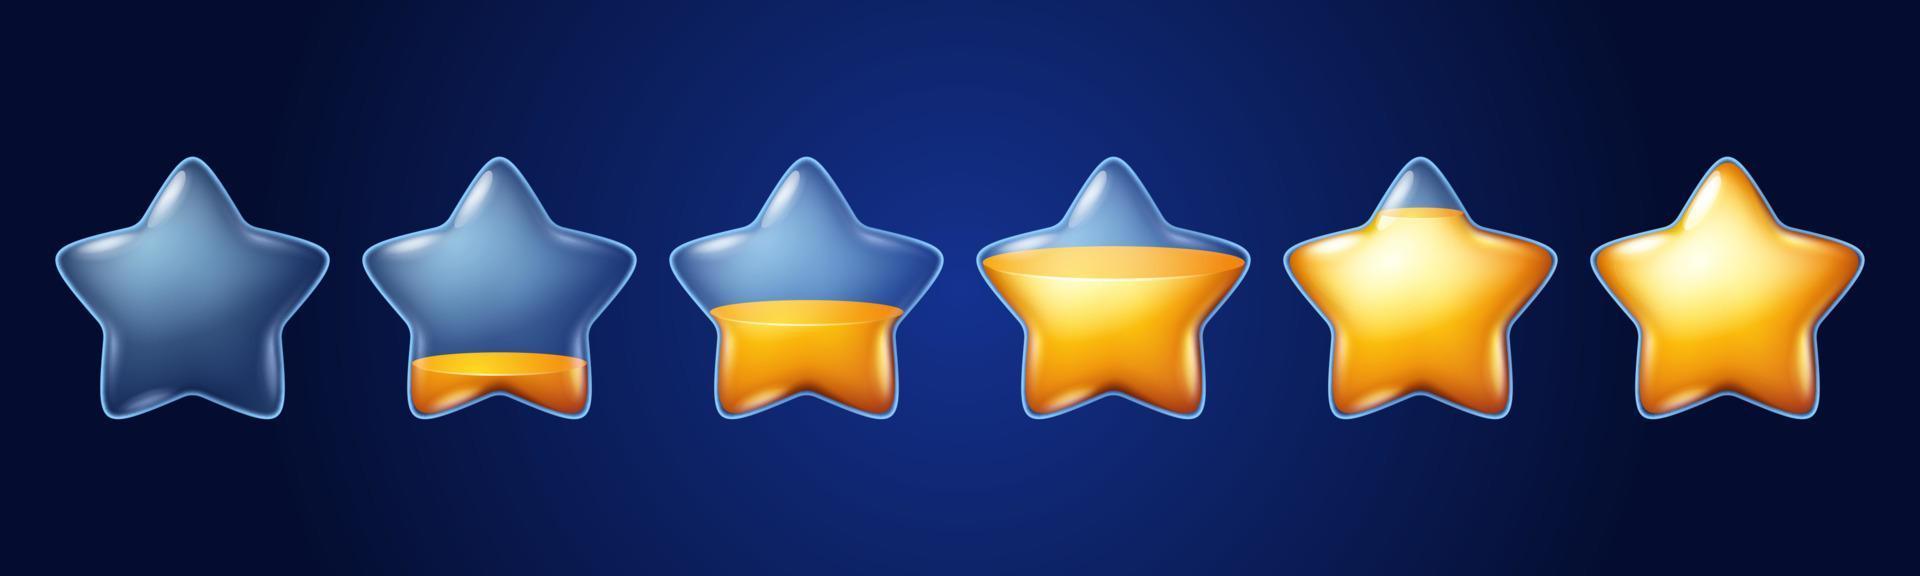 Gold stars game icons with fill progress vector